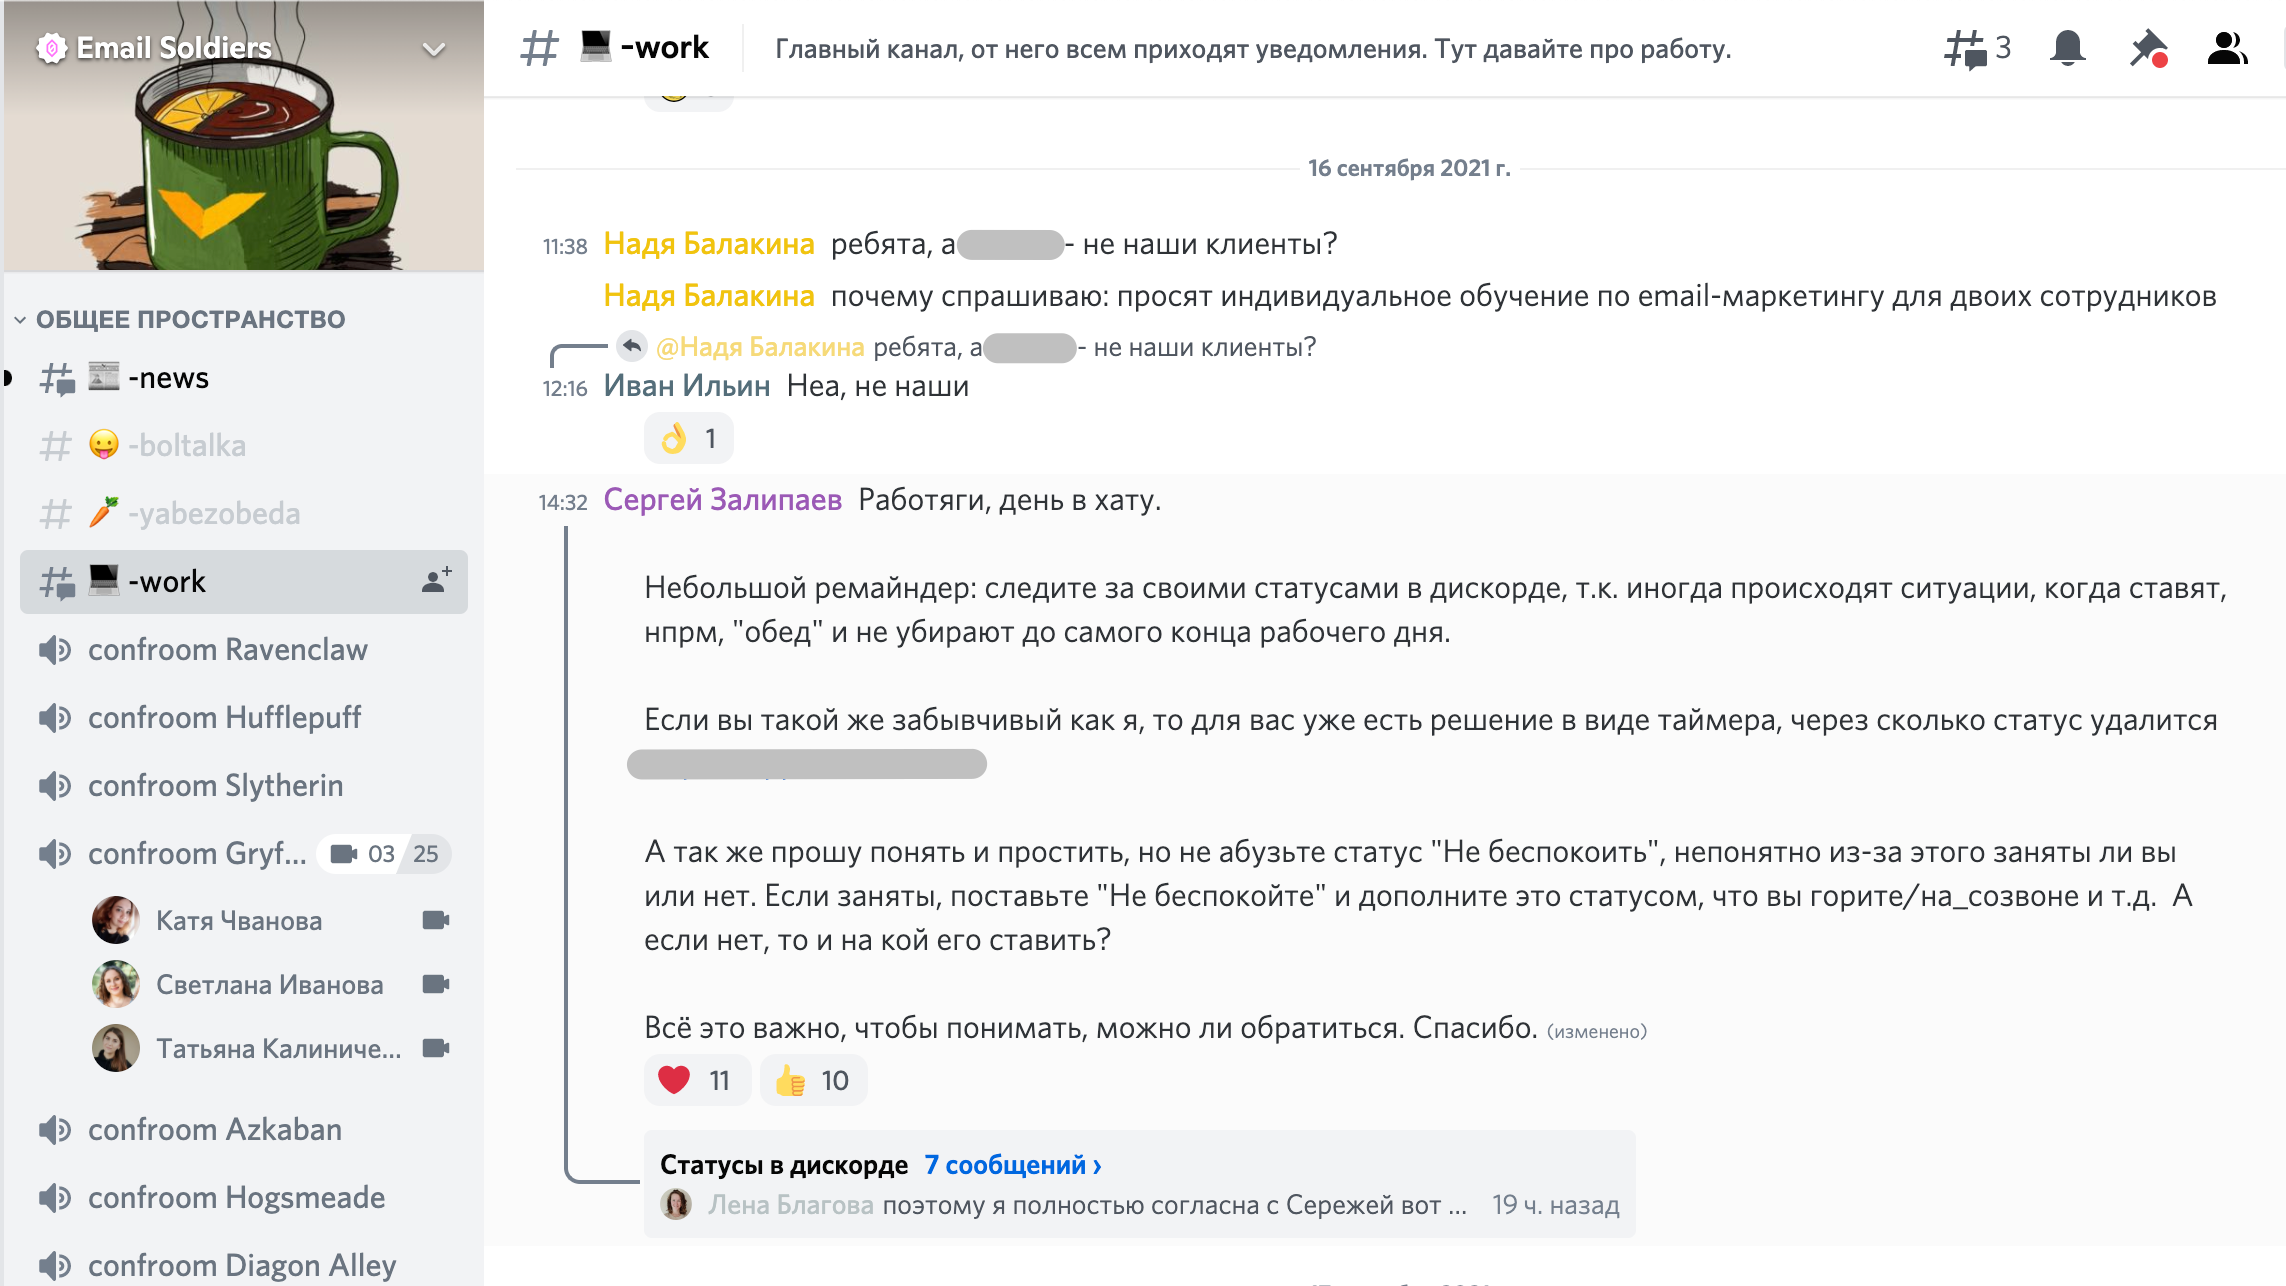 дискорд в email soldiers